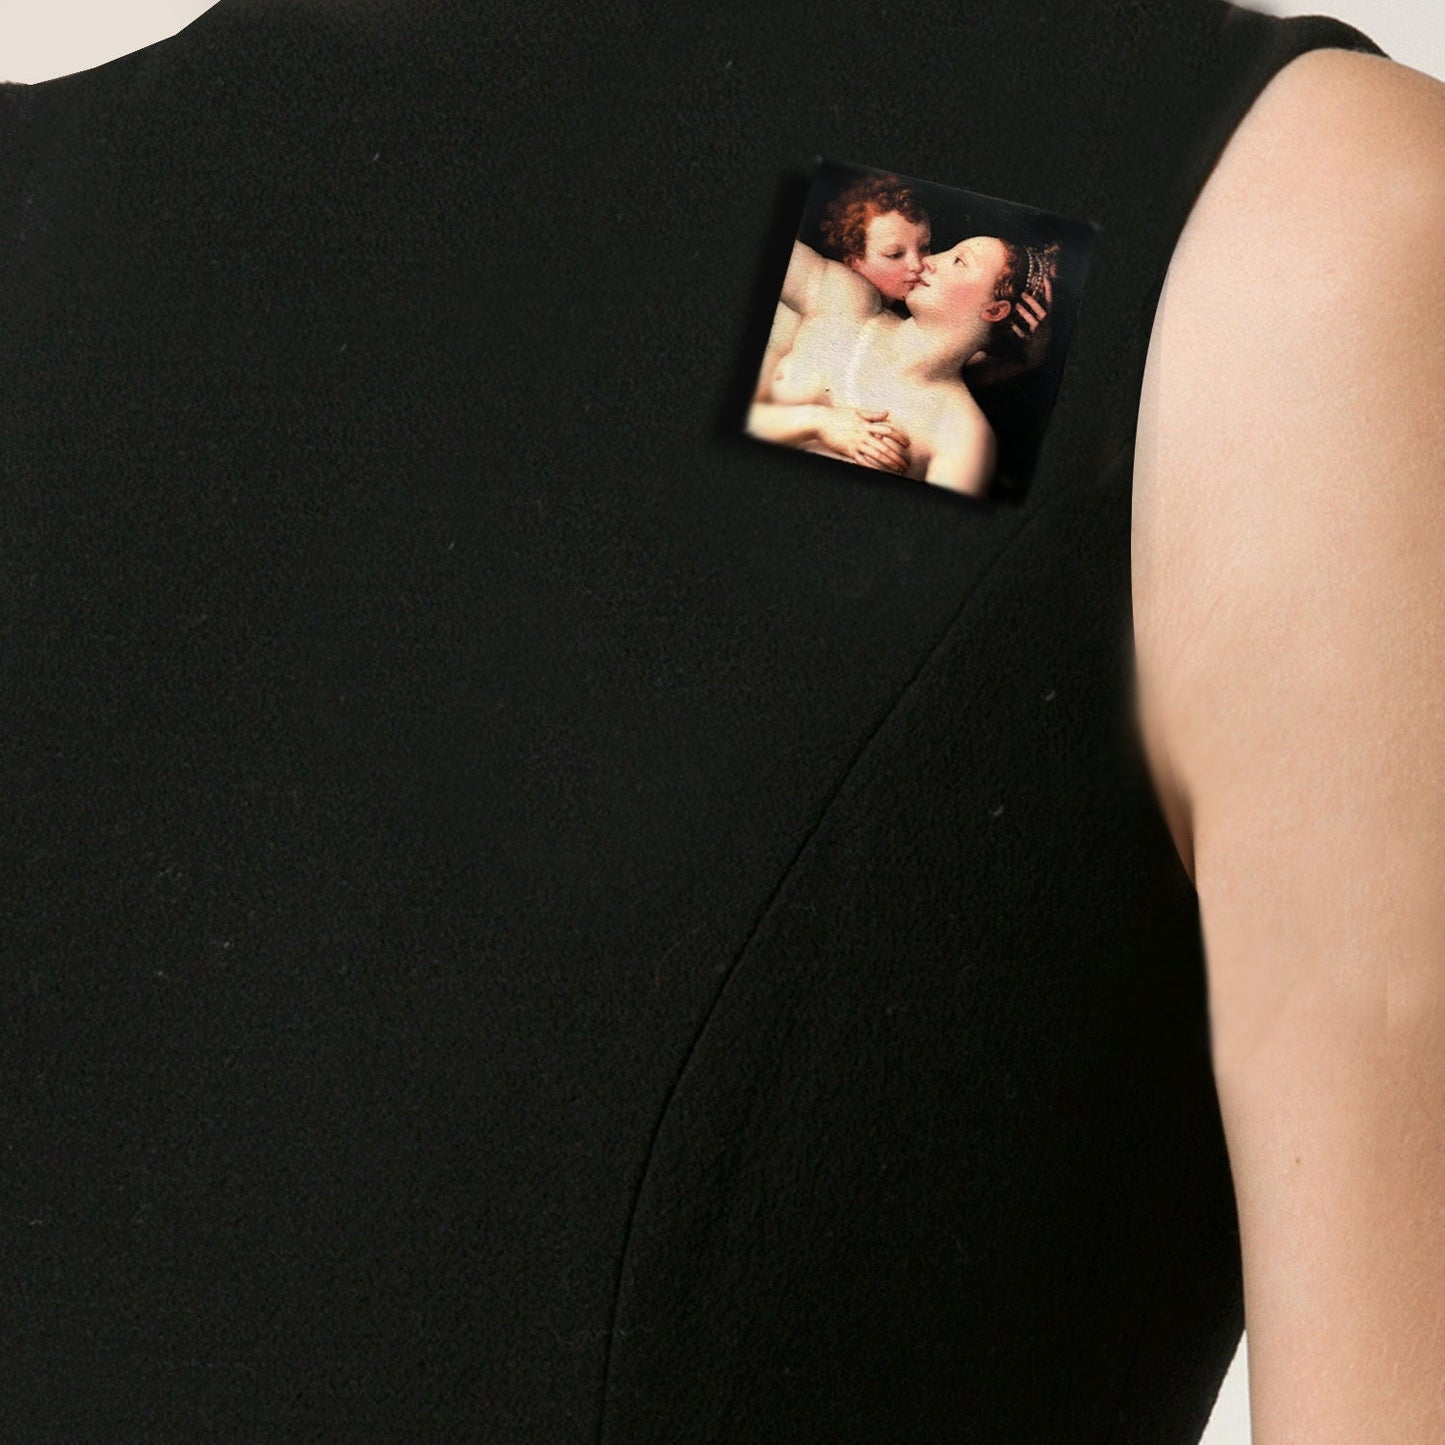 Wooden brooch ,Venus kissing Cupido, Rinaissance art painting by Bronzino. 4.3cm squared, quirky brooch.